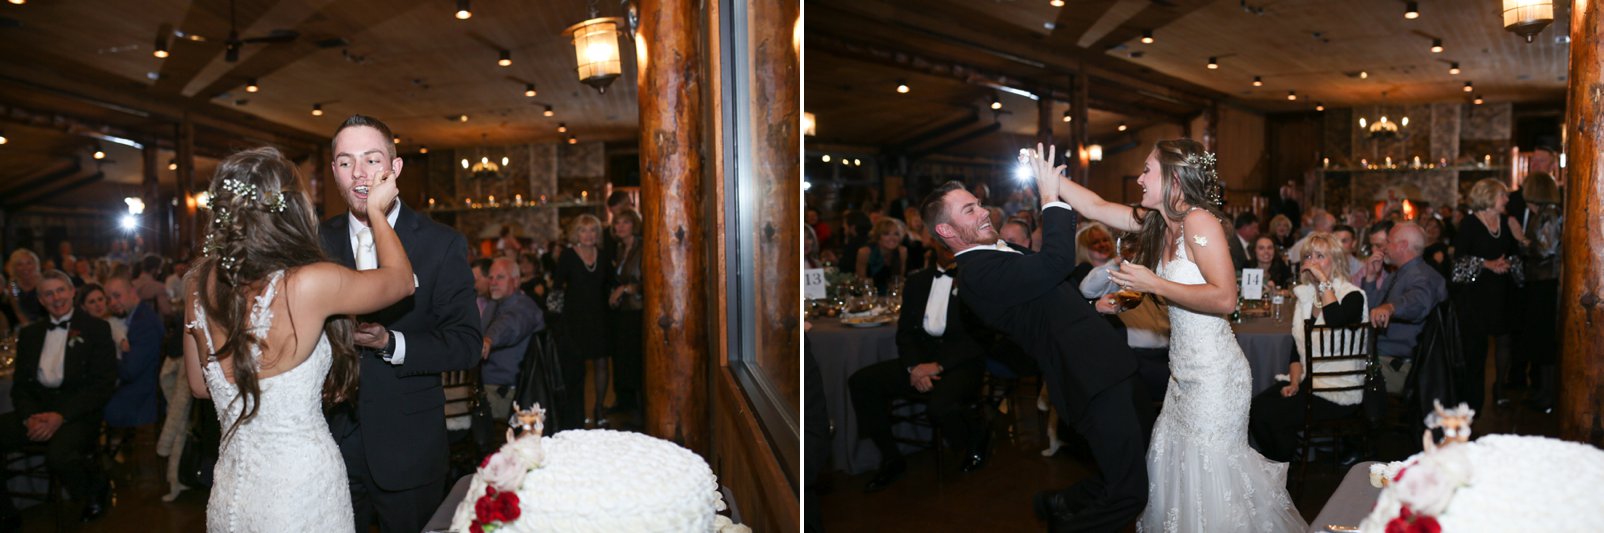 cake cutting during reception at spruce mountain ranch wedding